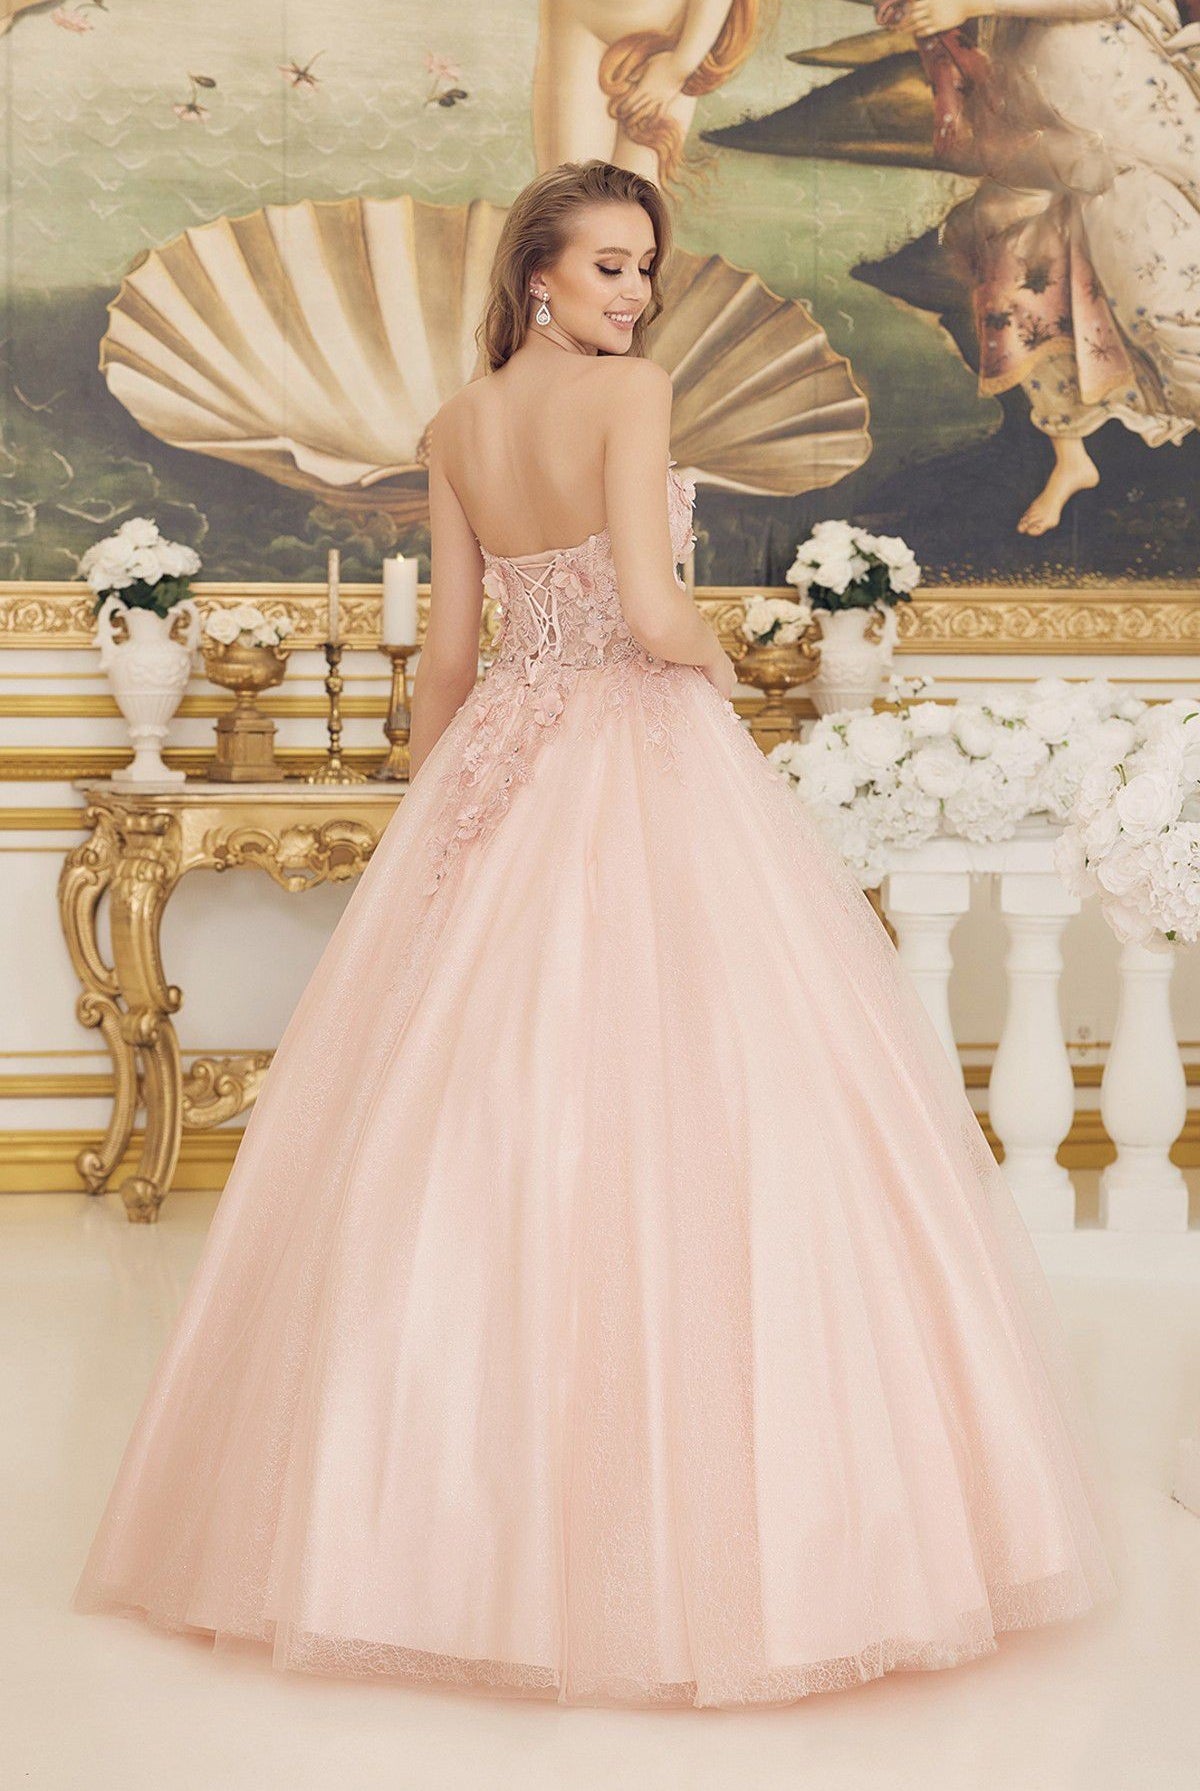 3D Floral Strapless Sweetheart Bodice Long Quinceanera Dress NXCU1192-Quiinceanera Dress-smcfashion.com